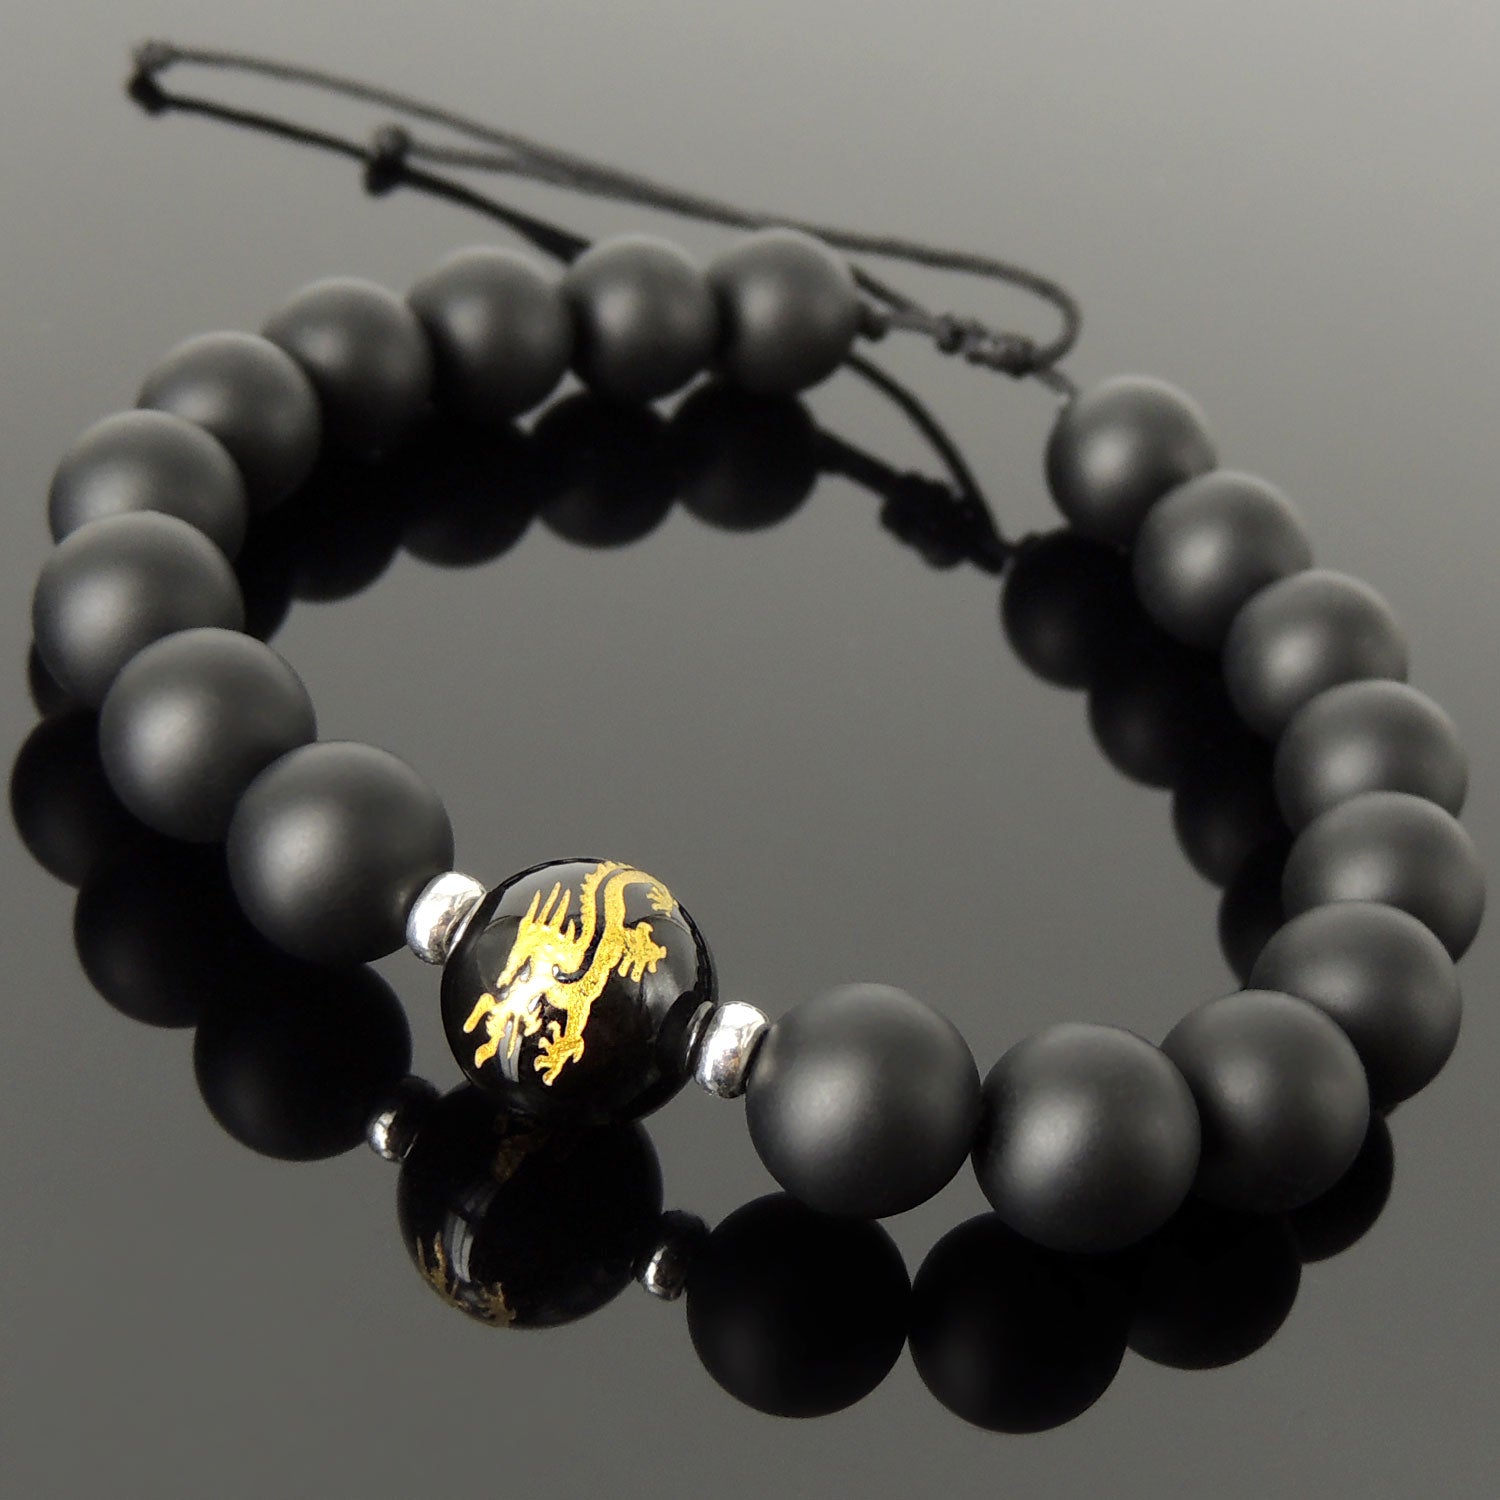 Handmade Jewelry Adjustable Braided Bracelet - Men's Women's Tai Chi, Compassion, Protection with Natural Healing Gemstones Black Onyx, Gold Hot Stamps Dragon & Cloud Strength Symbols, Genuine Non-Plated Sterling Silver BR1851